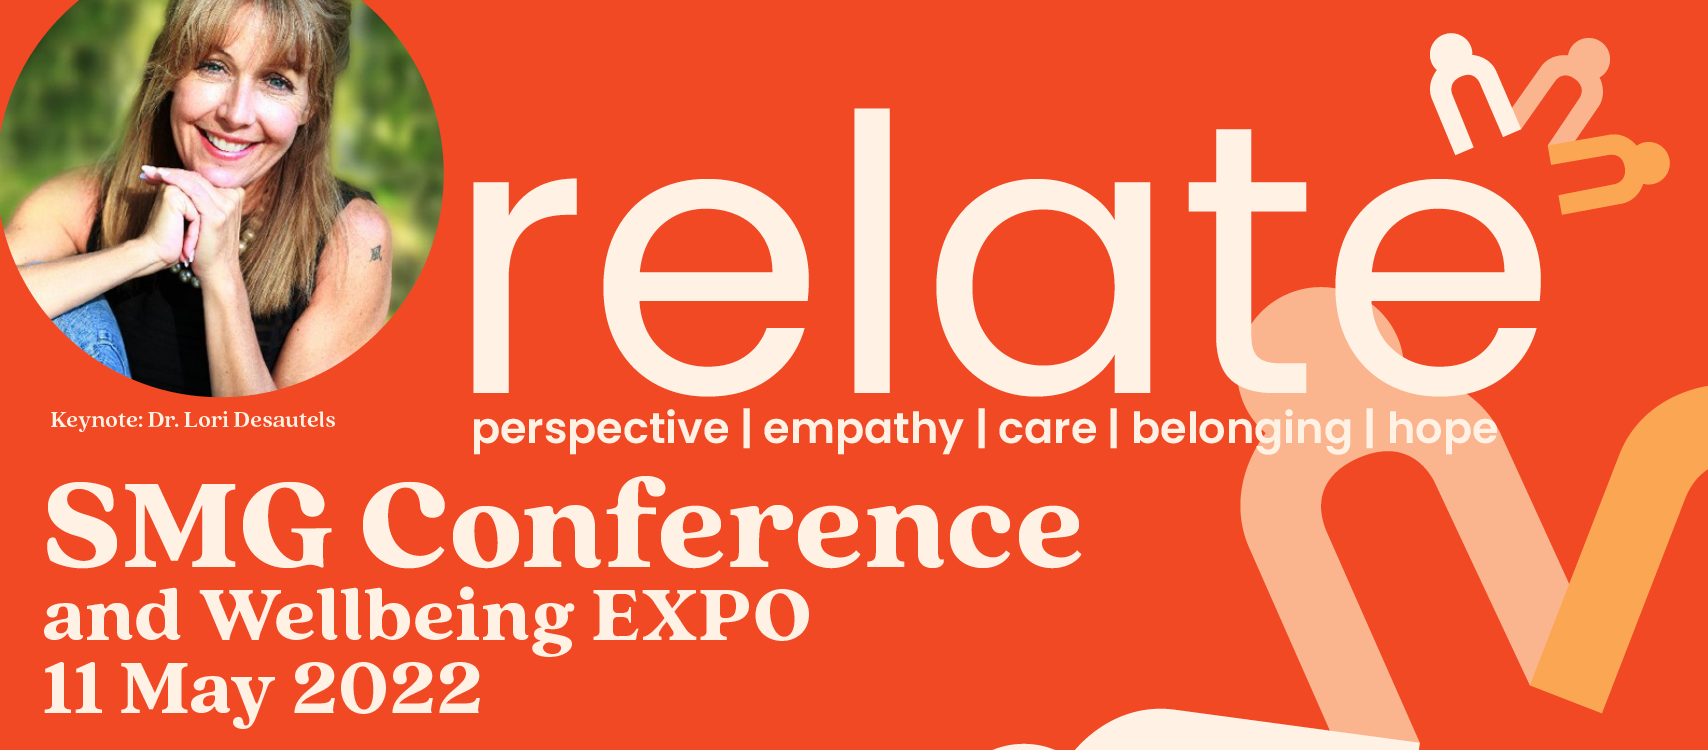 RELATE SMG Conference 2022